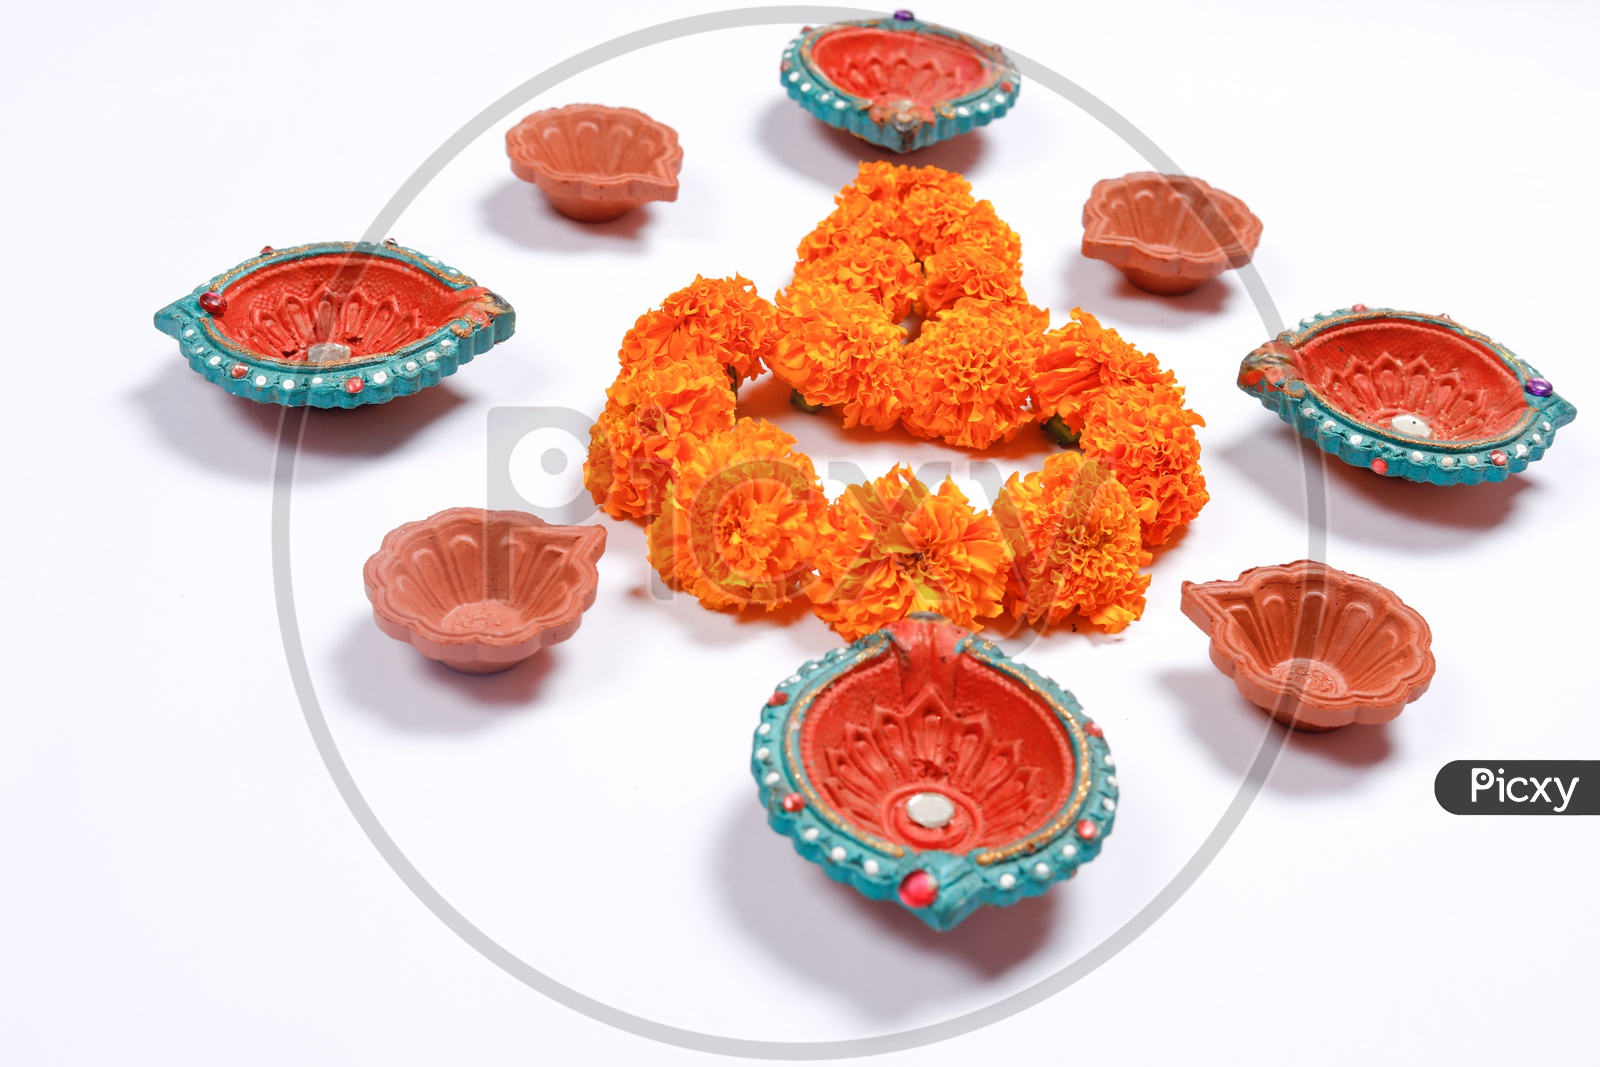 Indian Diwali Lamps / Diya With Marigold Flowers Closeup Shot on a White Background